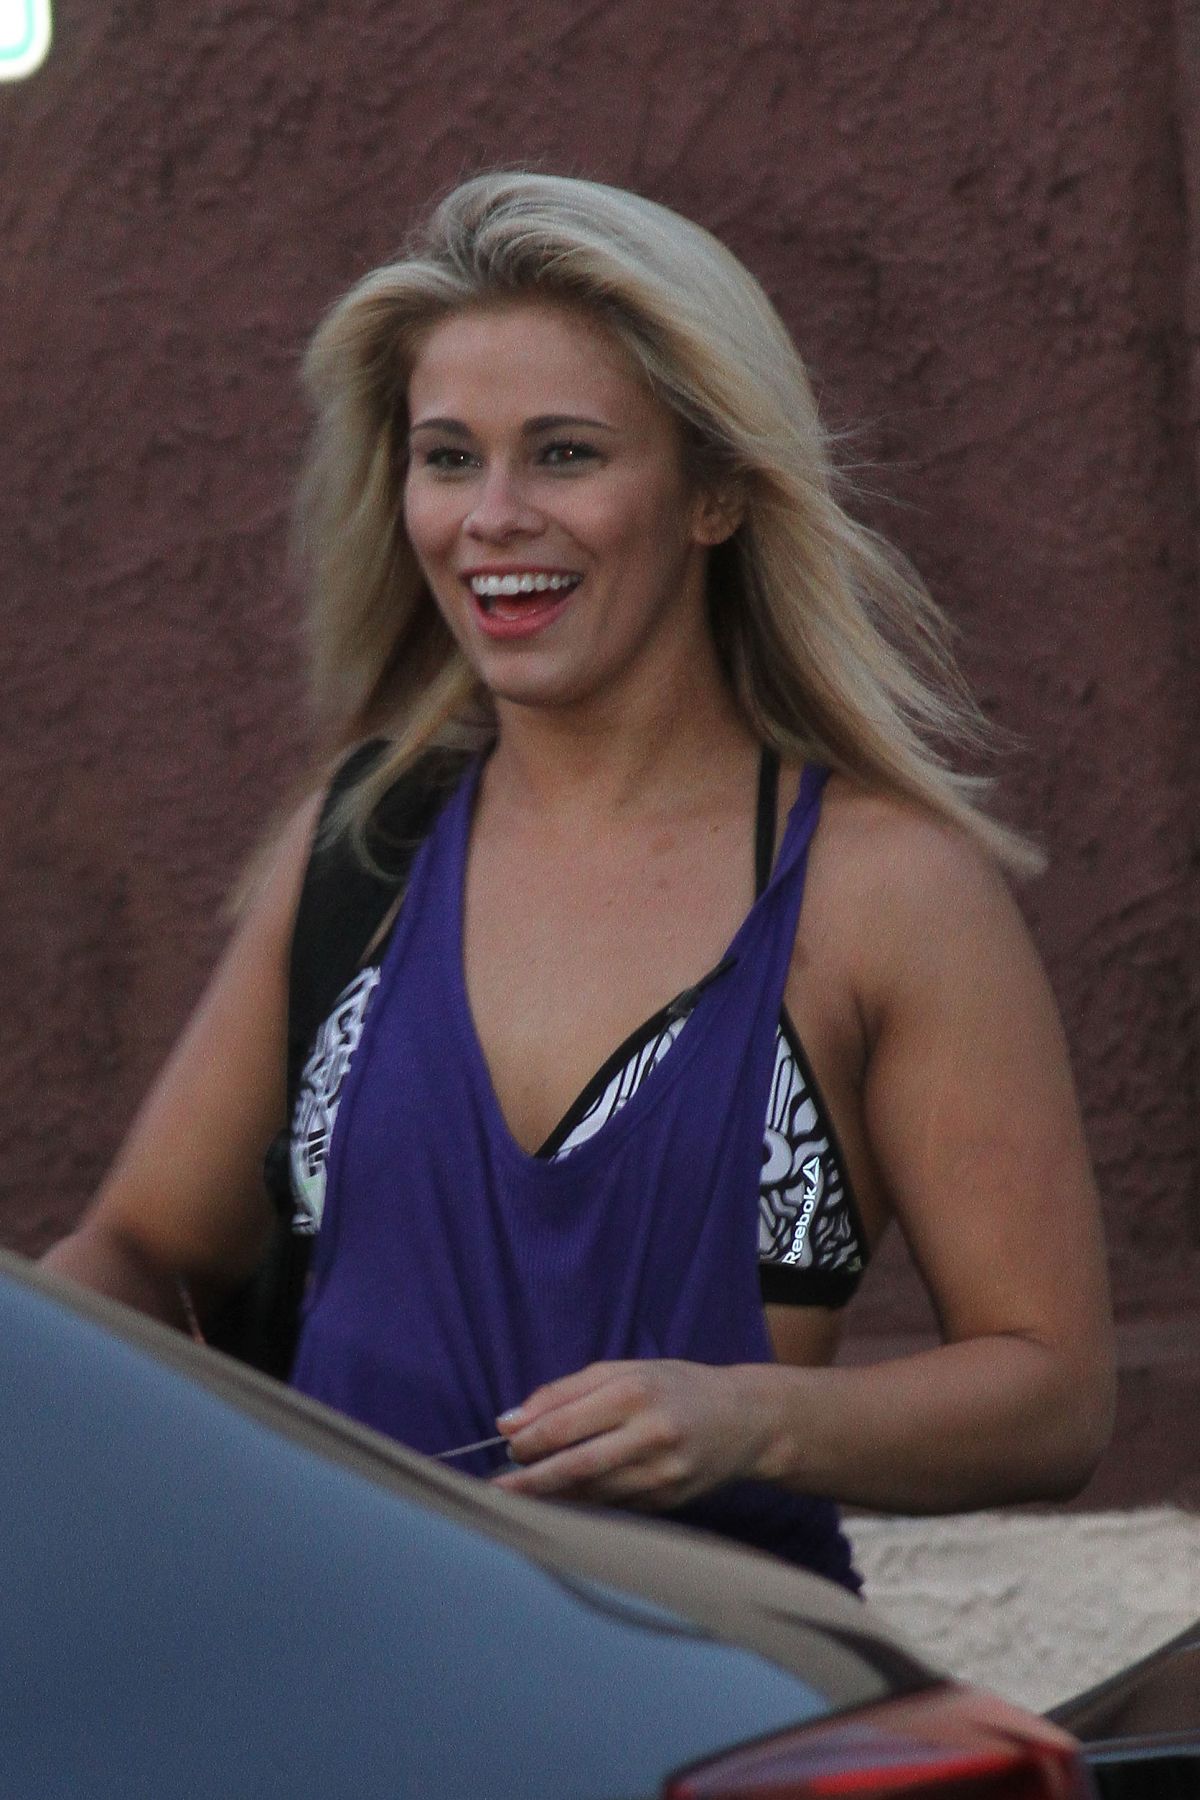 PAIGE VANZANT at Dancing with the Stars Rehersal in Hollywood  05/12/2016